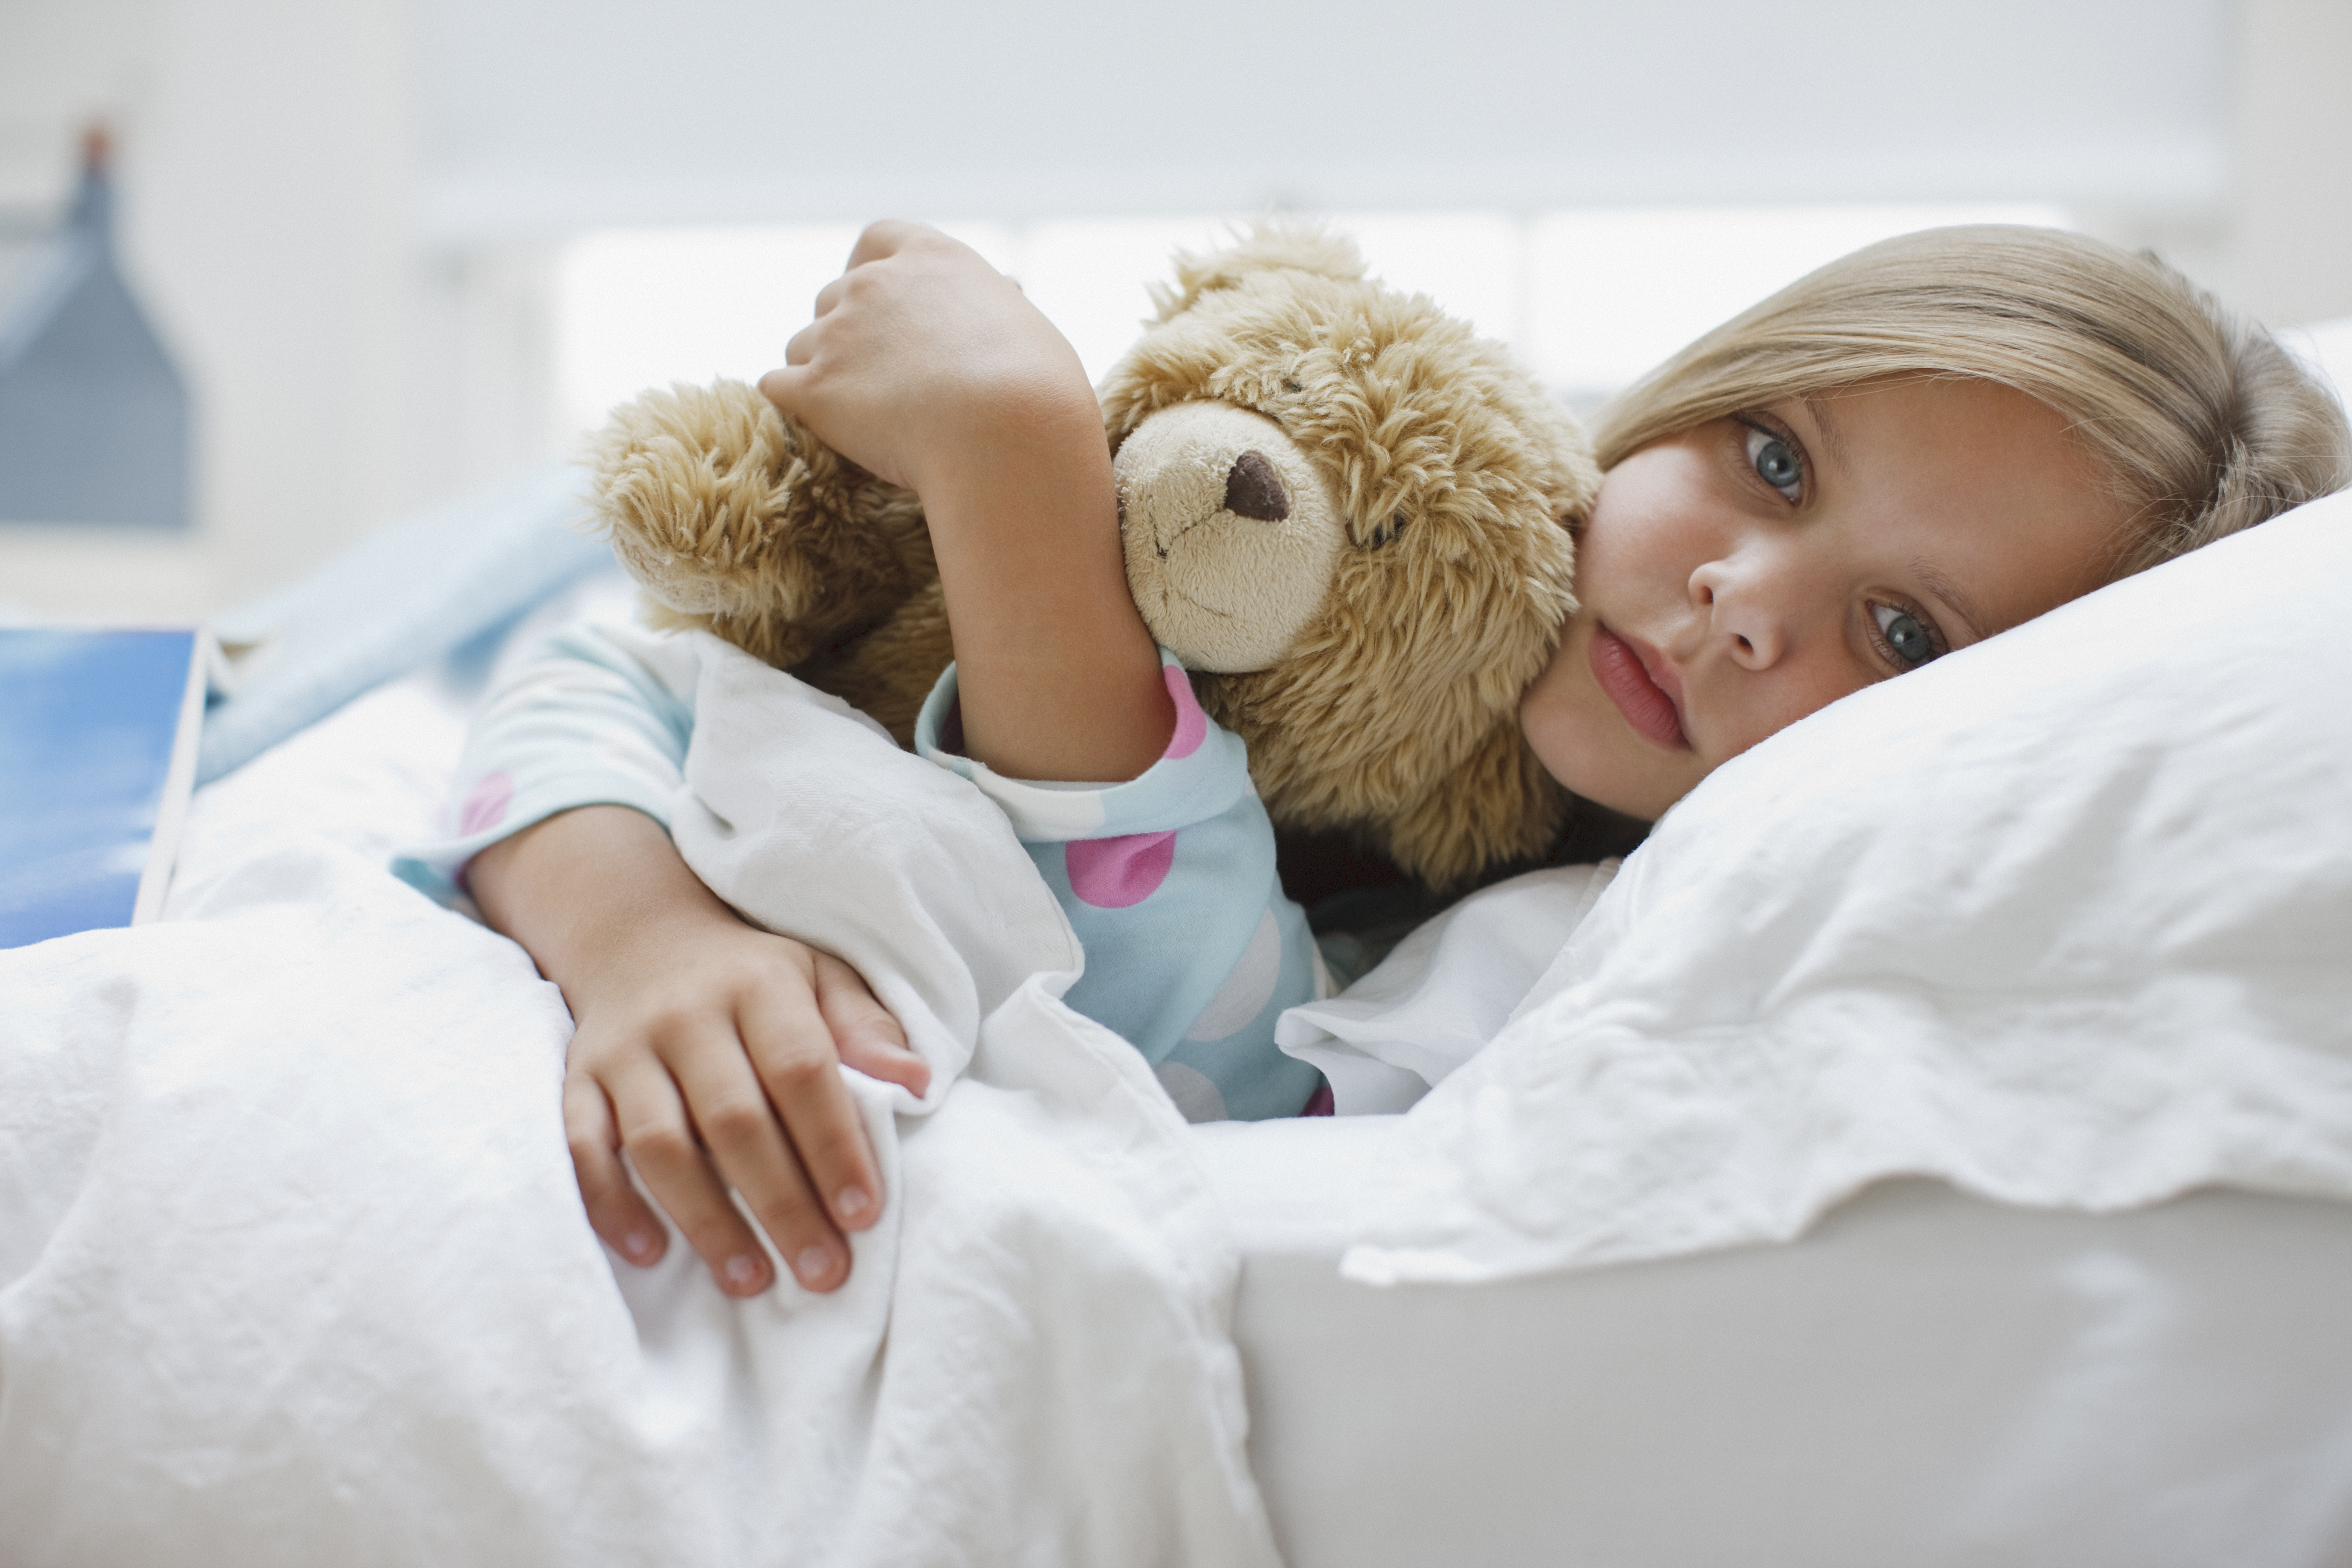 Sick girl laying in bed with teddy bear | Source: Getty Images